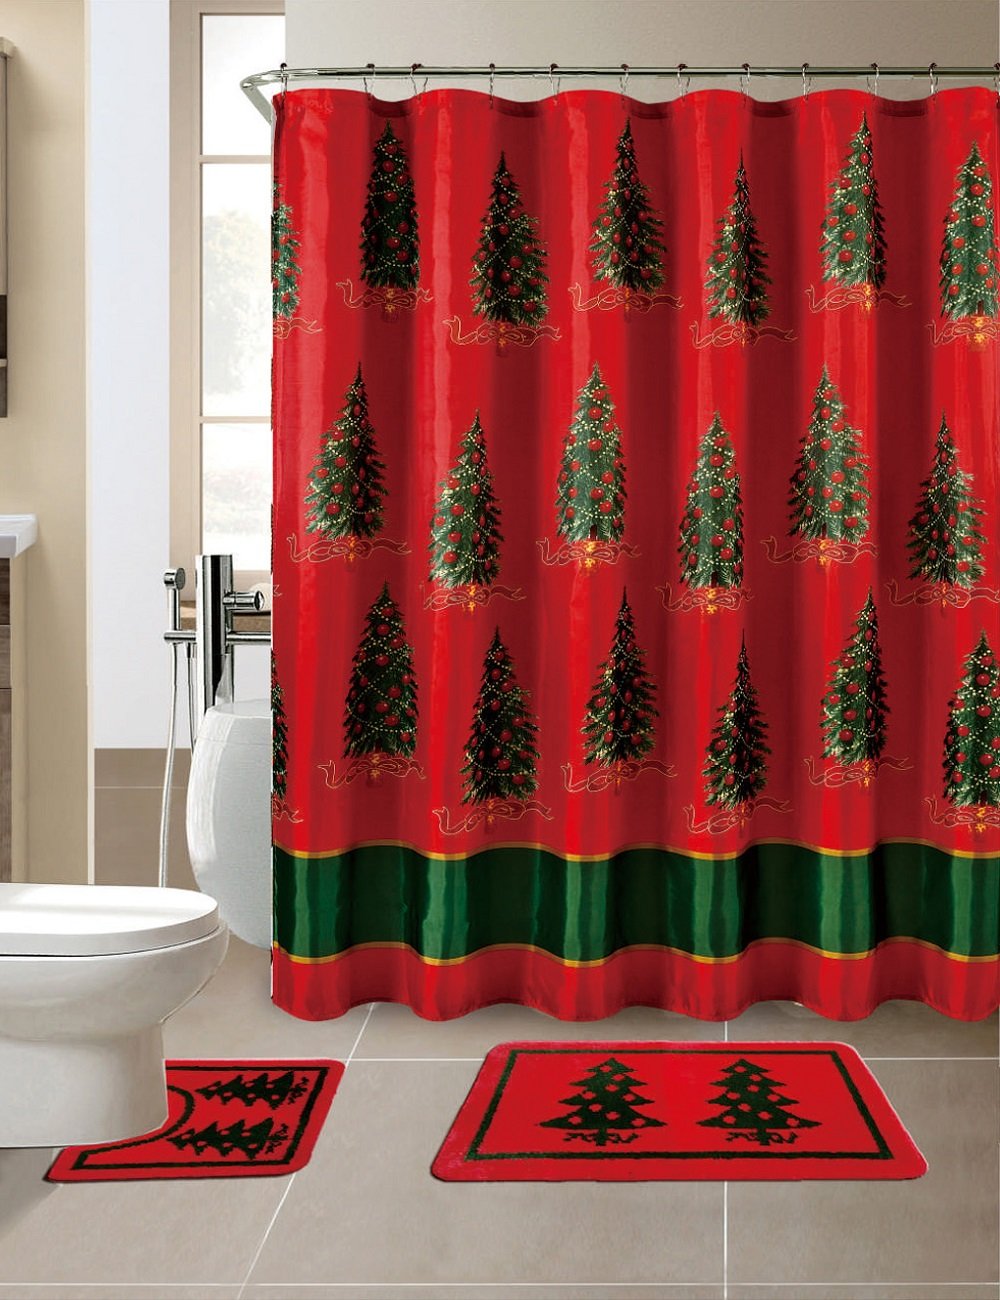 Season's Greetings 18 Piece Embroidery Bath Set. Bath Mat, Contour Mat, Shower Curtain,12 Matching Roller Shower Hooks, 3 Piece Matching Towel Seat Small to Large (18 Piece,Merry Christmas Trees)